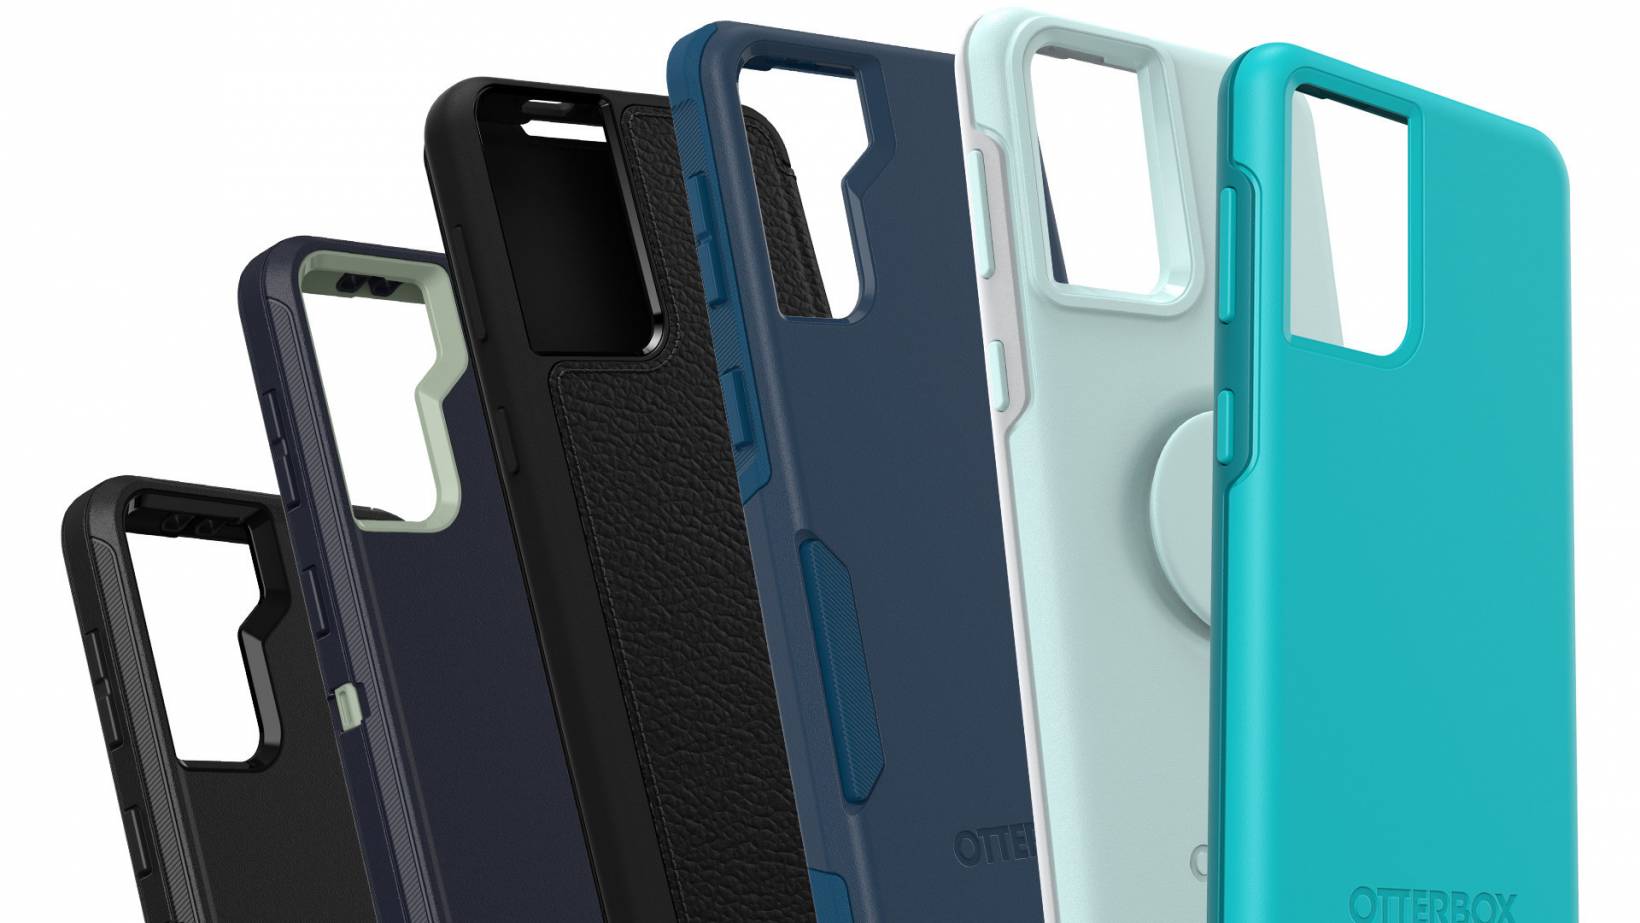 OtterBox releases new cases for Samsung Galaxy S21 lineup  Android